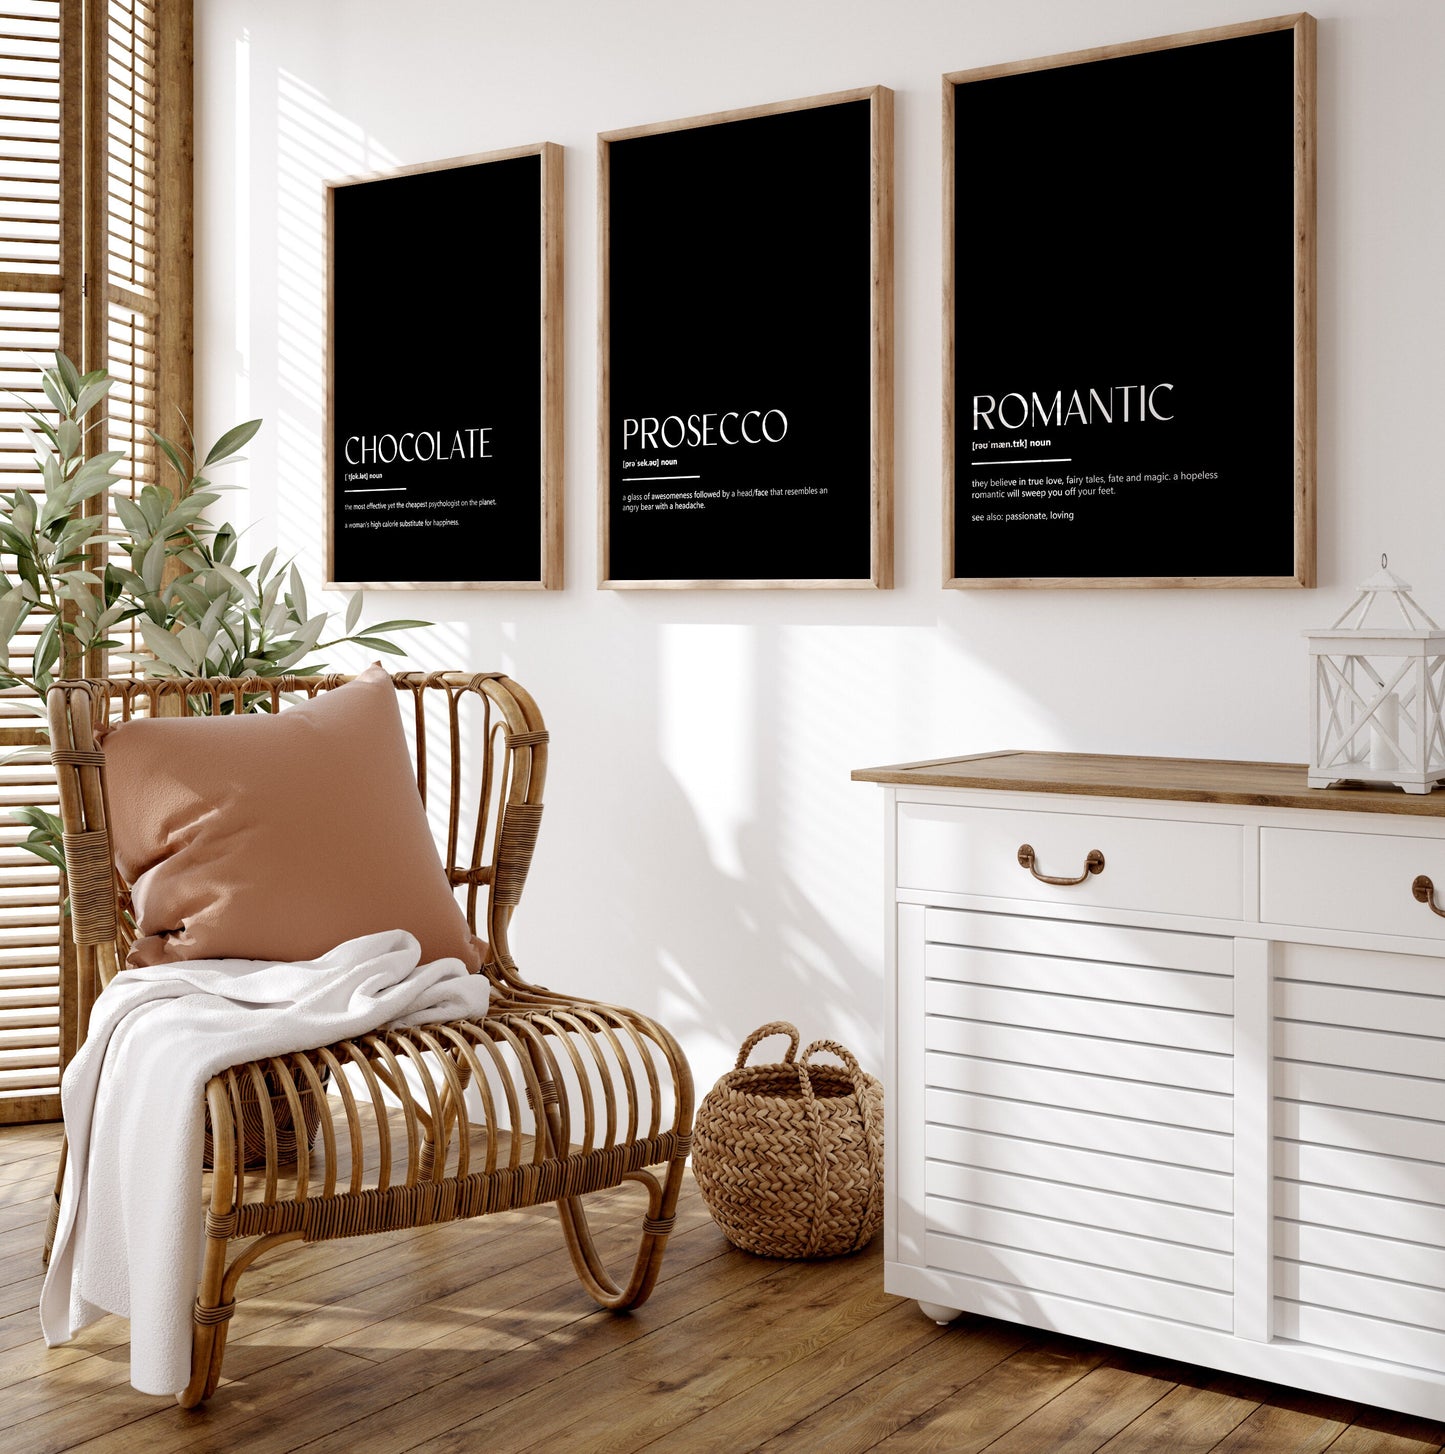 Romantic, Chocolate, Prosecco Set Of 3 Definition Prints - Magic Posters